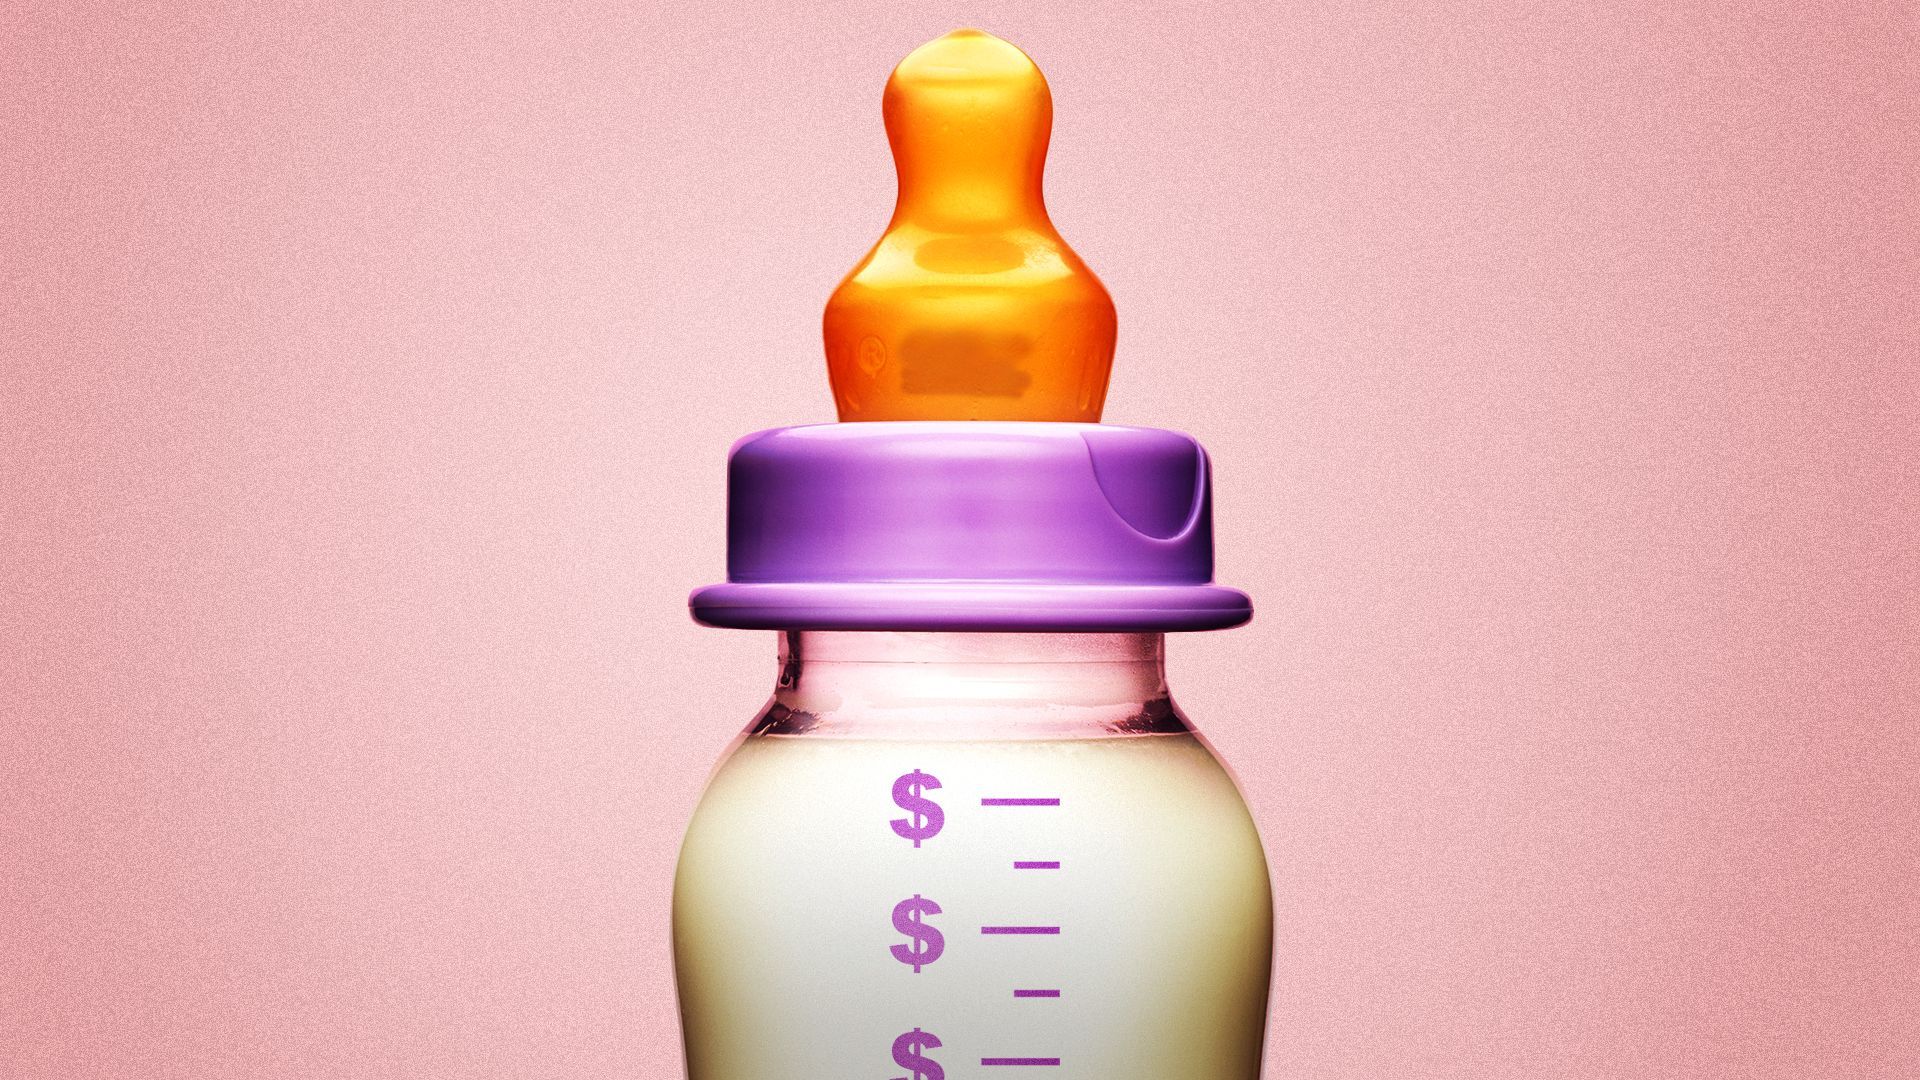 an illustration of a baby bottle full of milk with dollar signs next to the measurement lines